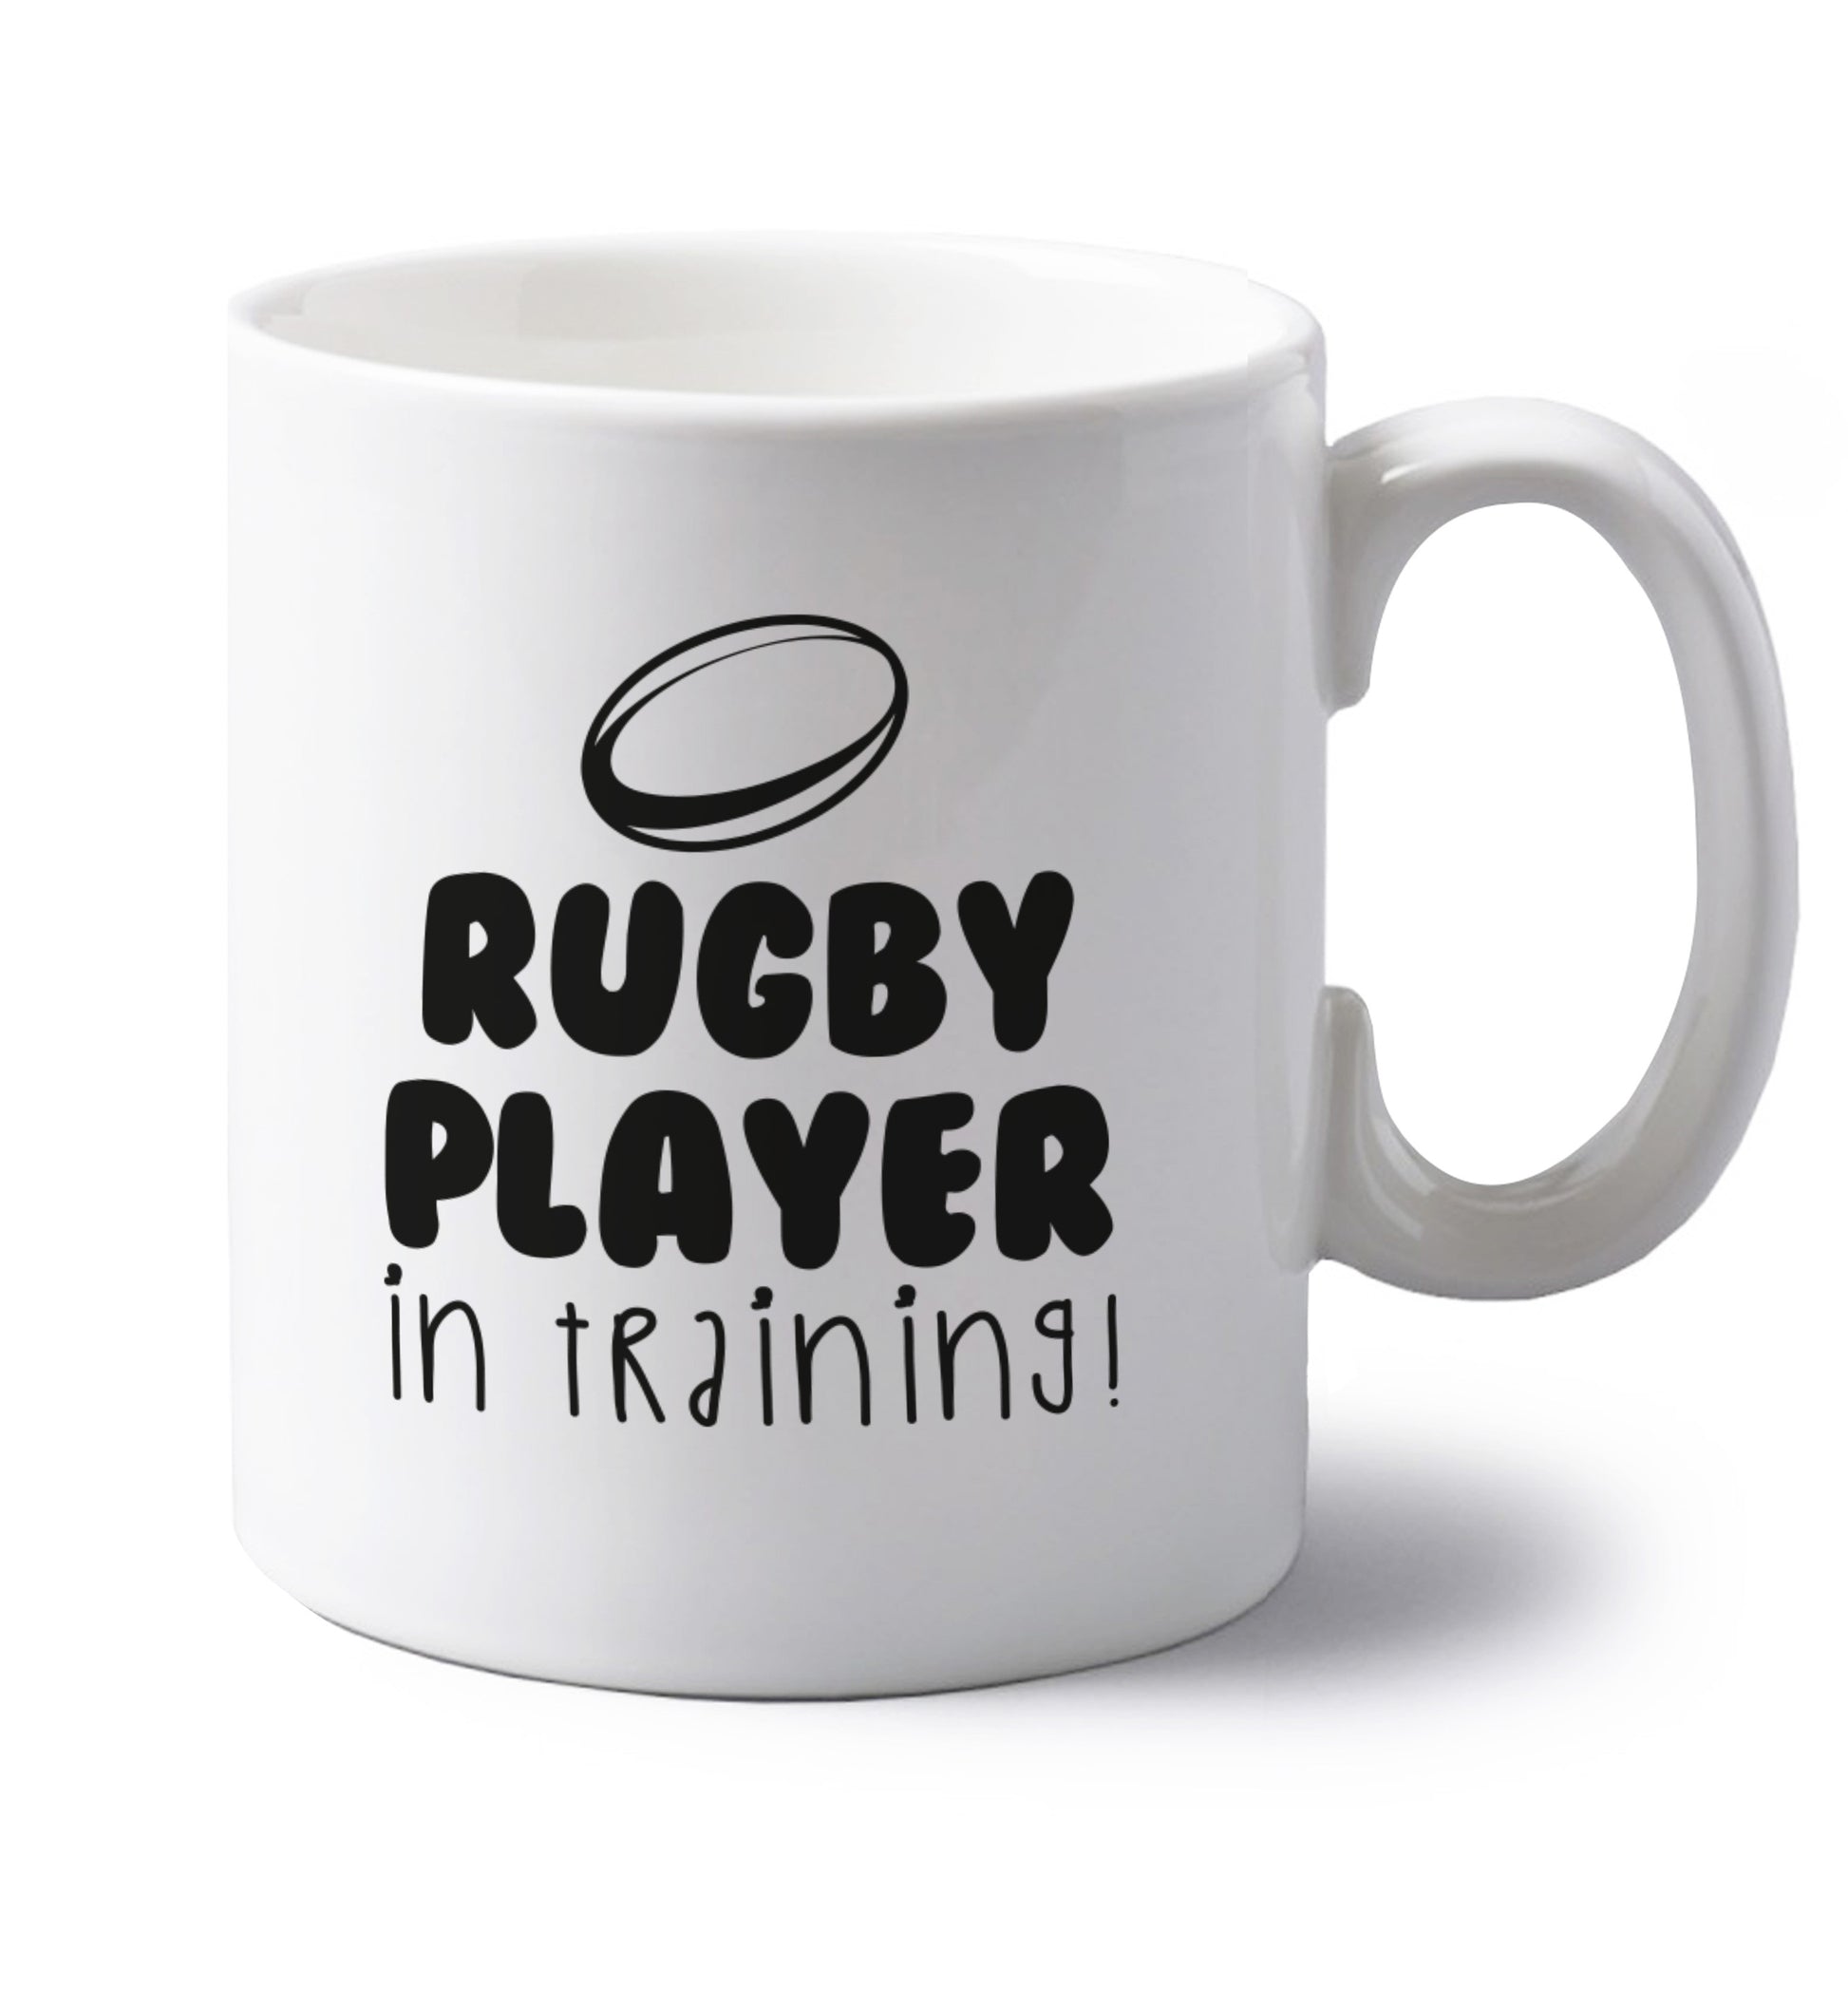 Rugby player in training left handed white ceramic mug 